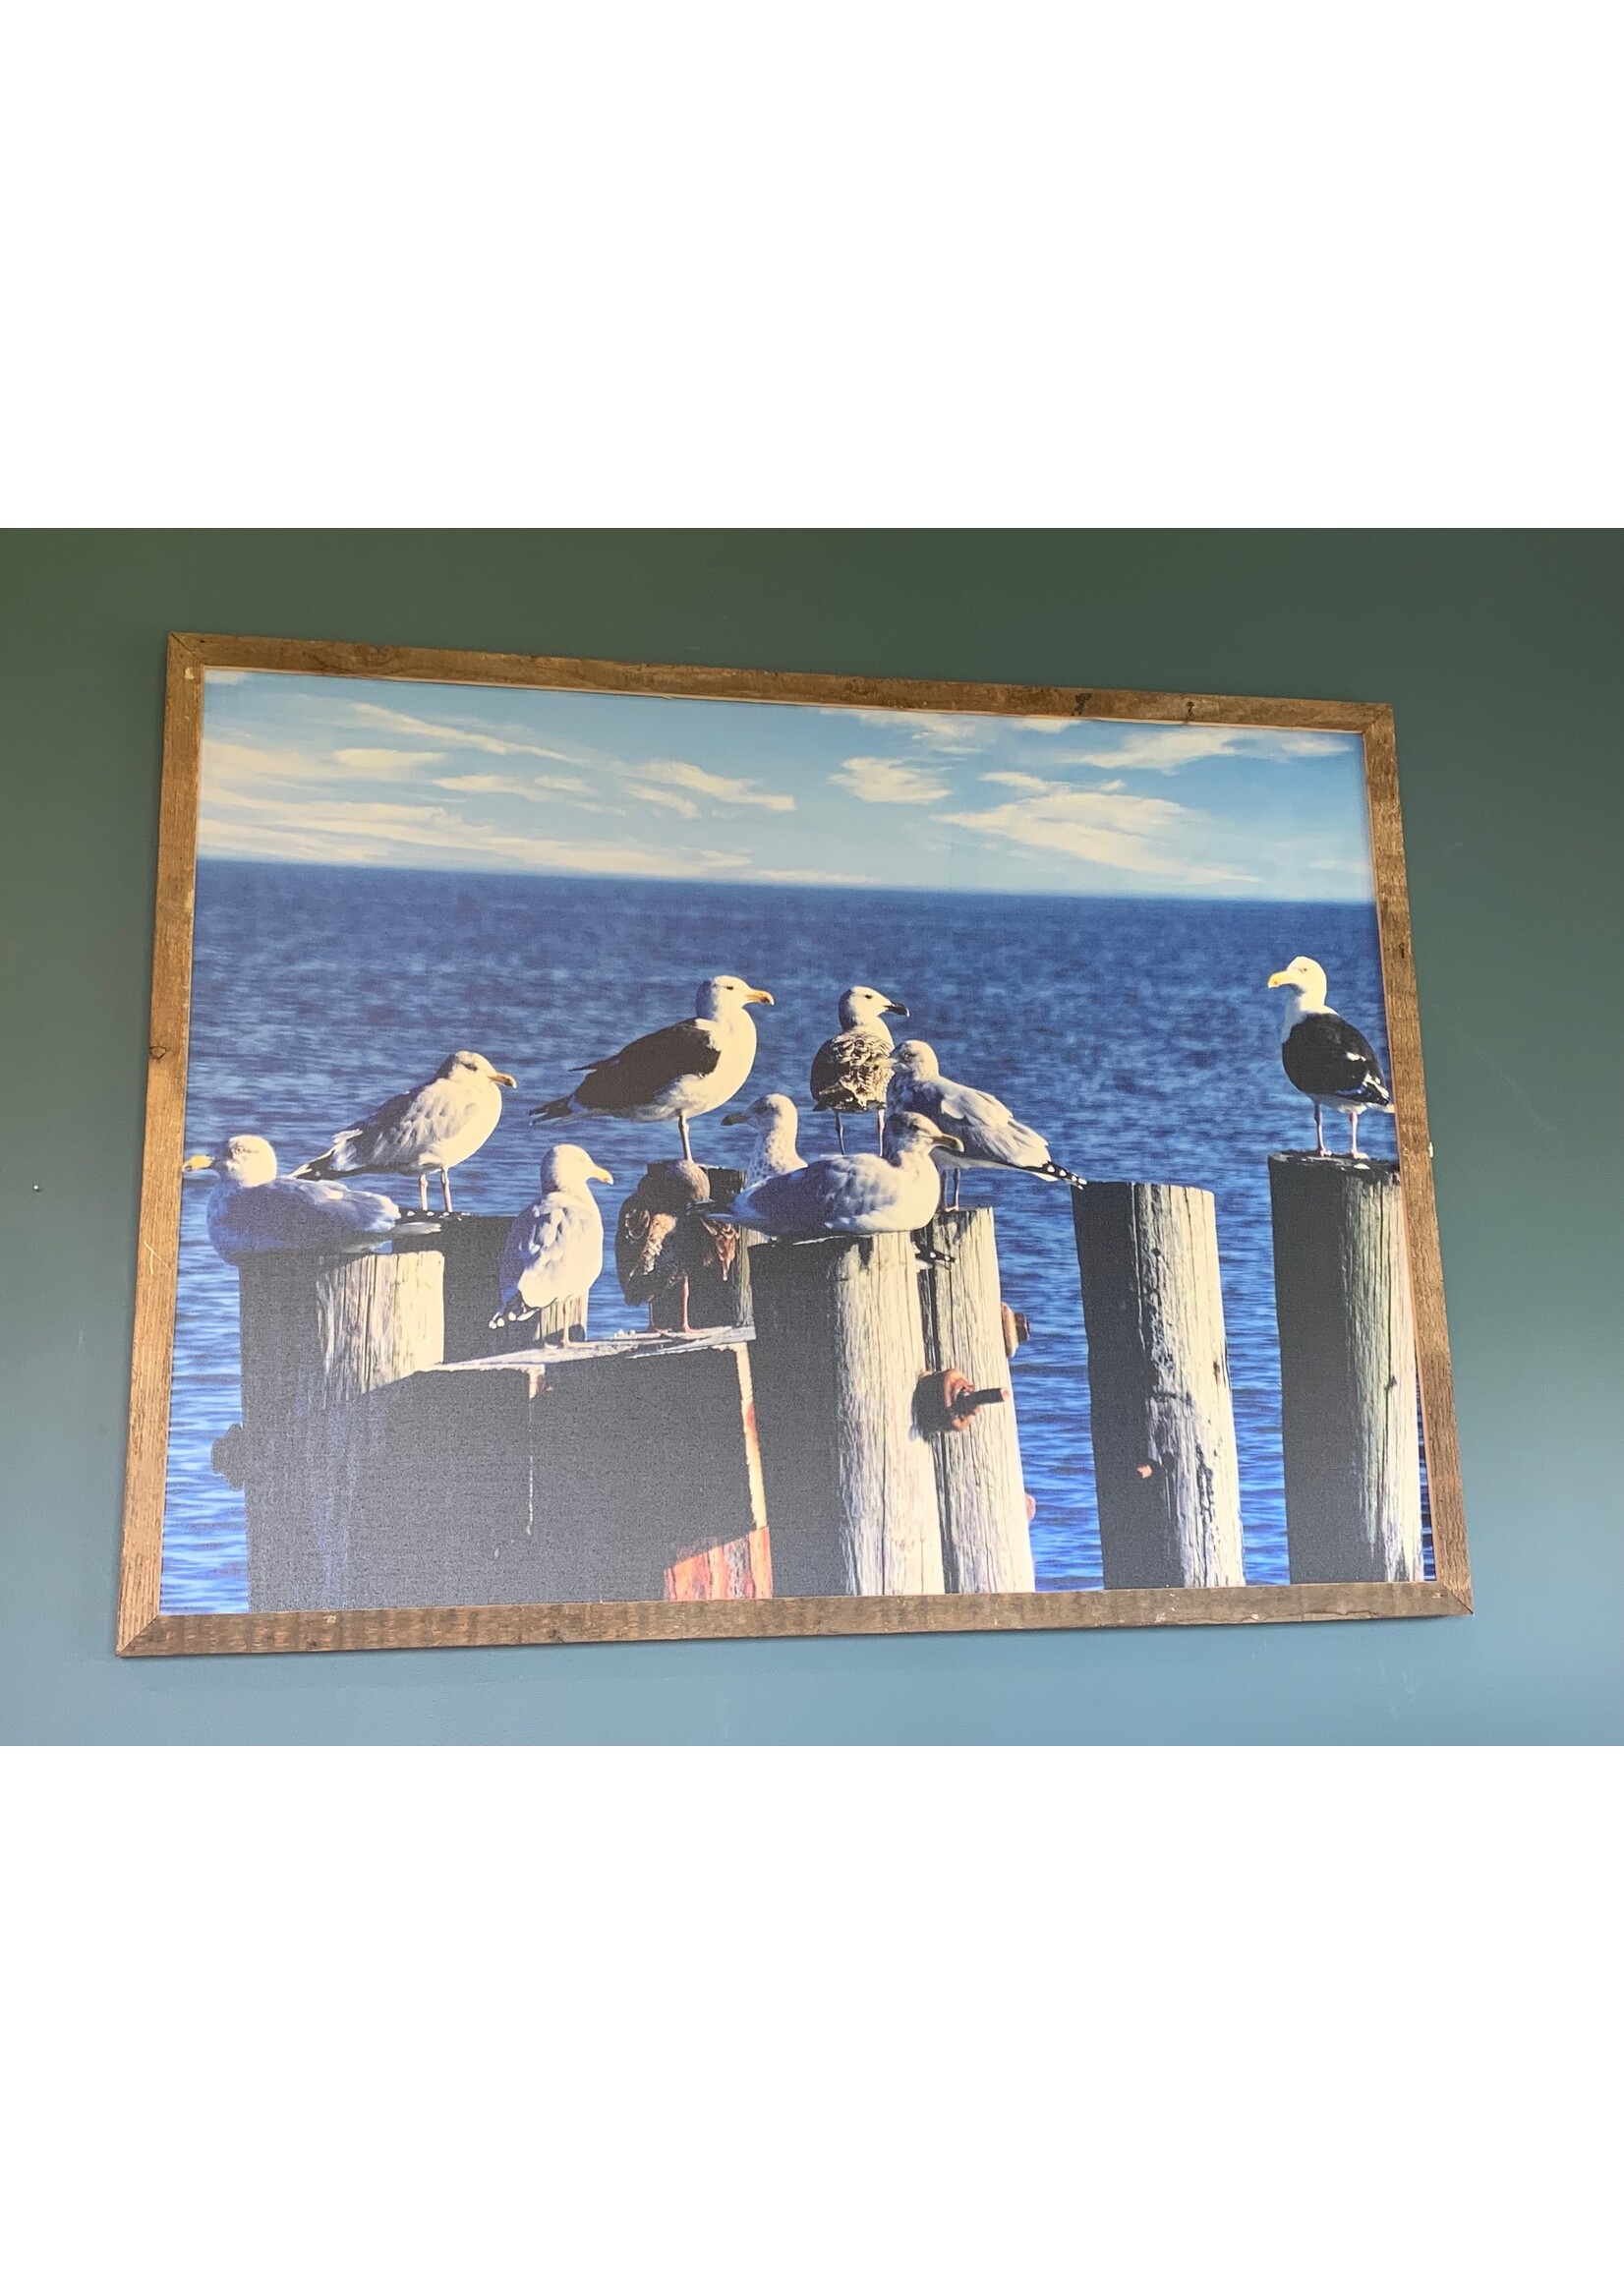 Old Wood Delaware OW Canvas Art - Seagulls on Posts Framed 49.25 x 37.25